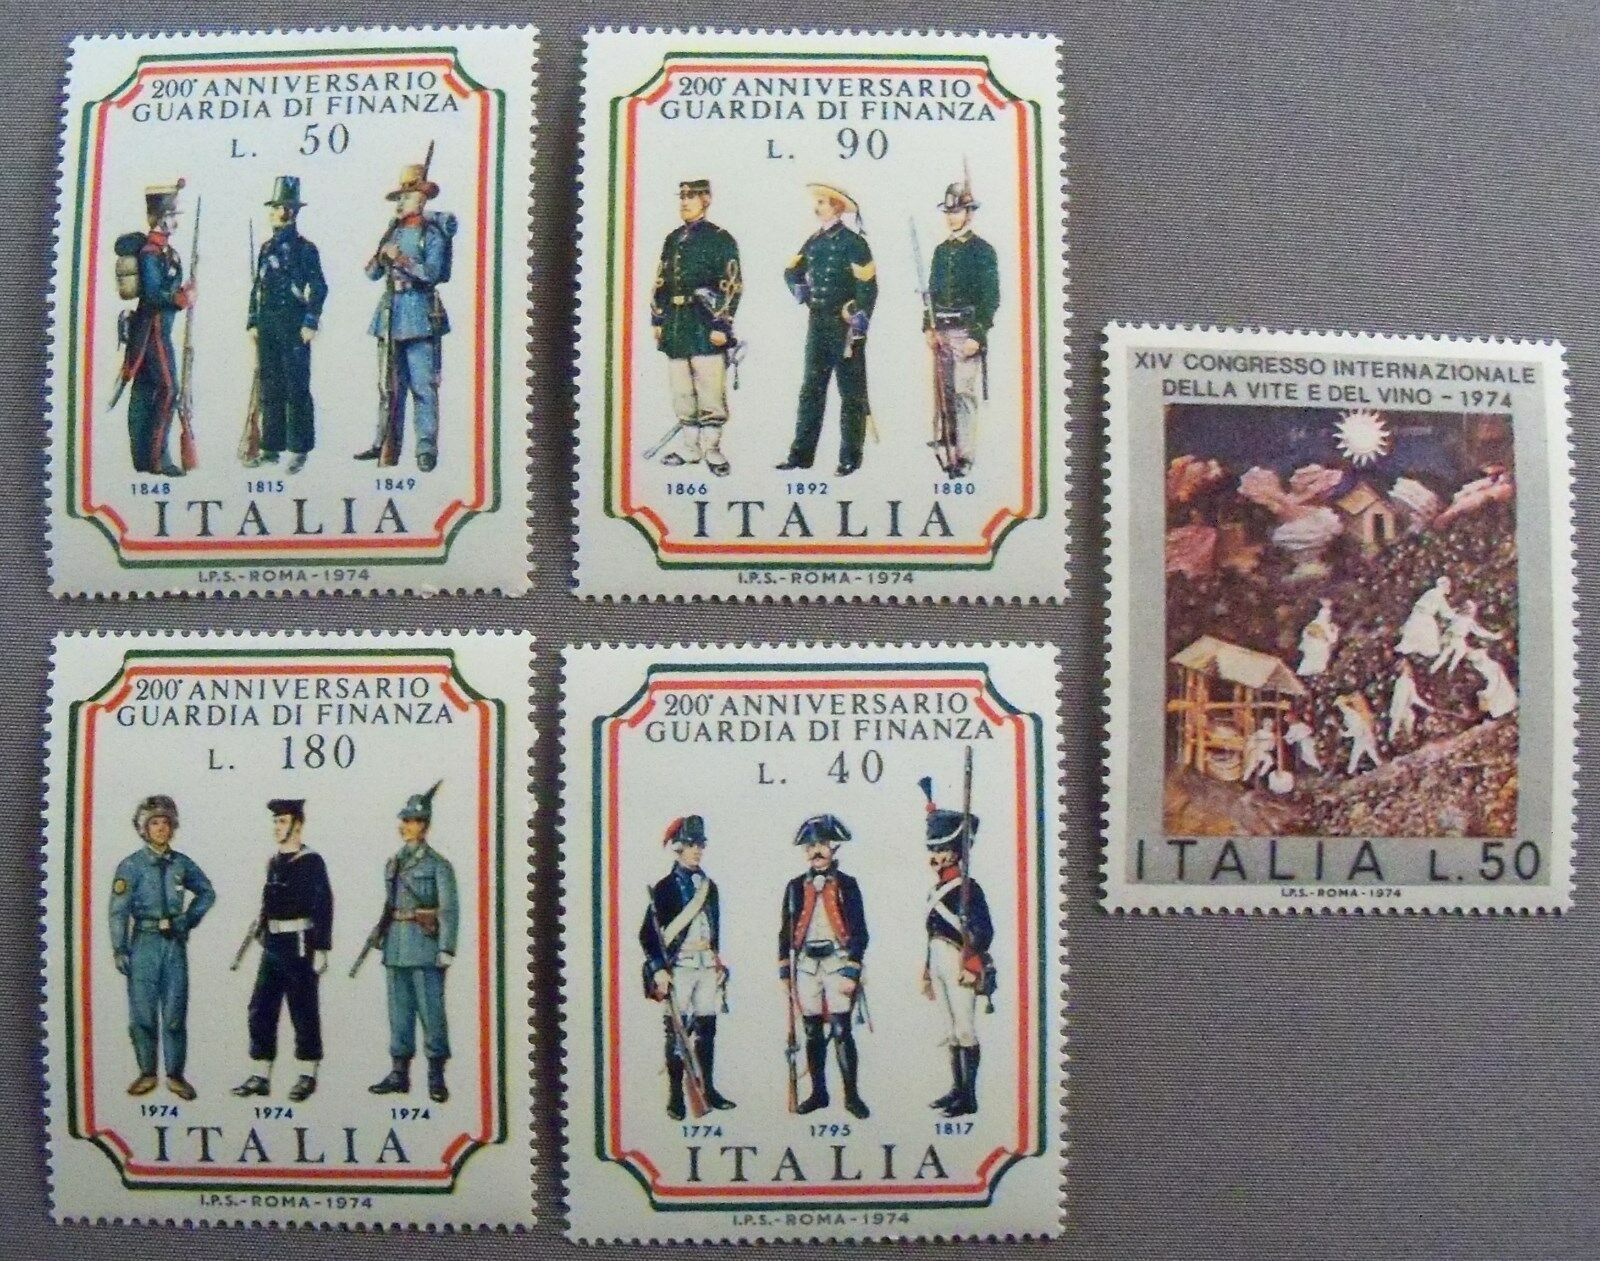 1974 Italian Stamps - Used - $29.69